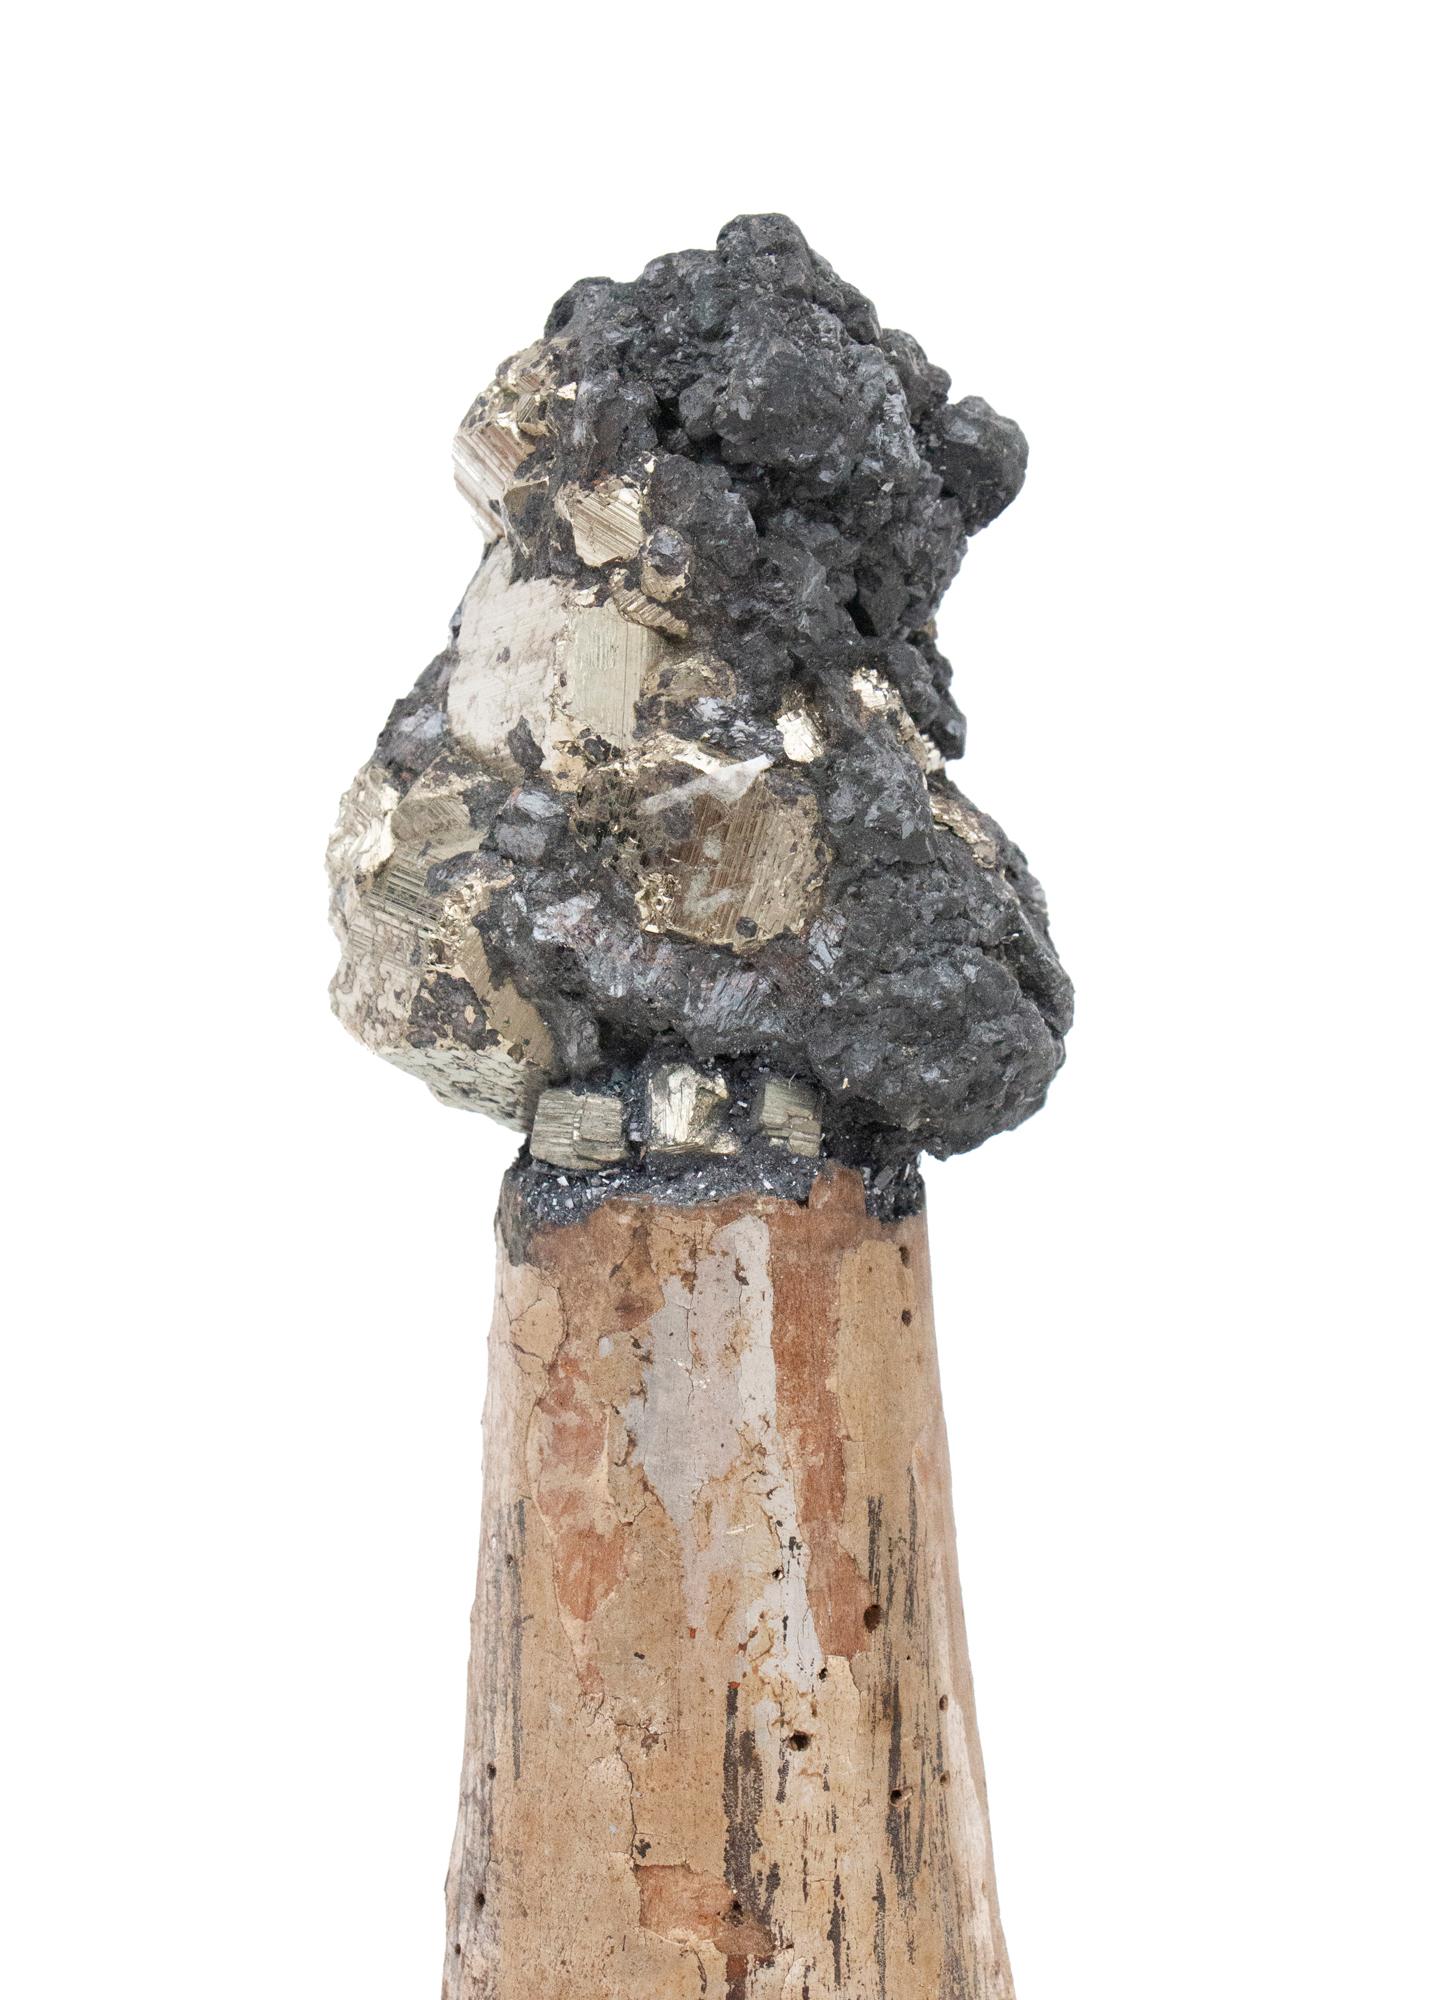 Rococo 18th Century Italian Gilded Candlestick Fragment with Pyrite in Matrix on Agate For Sale